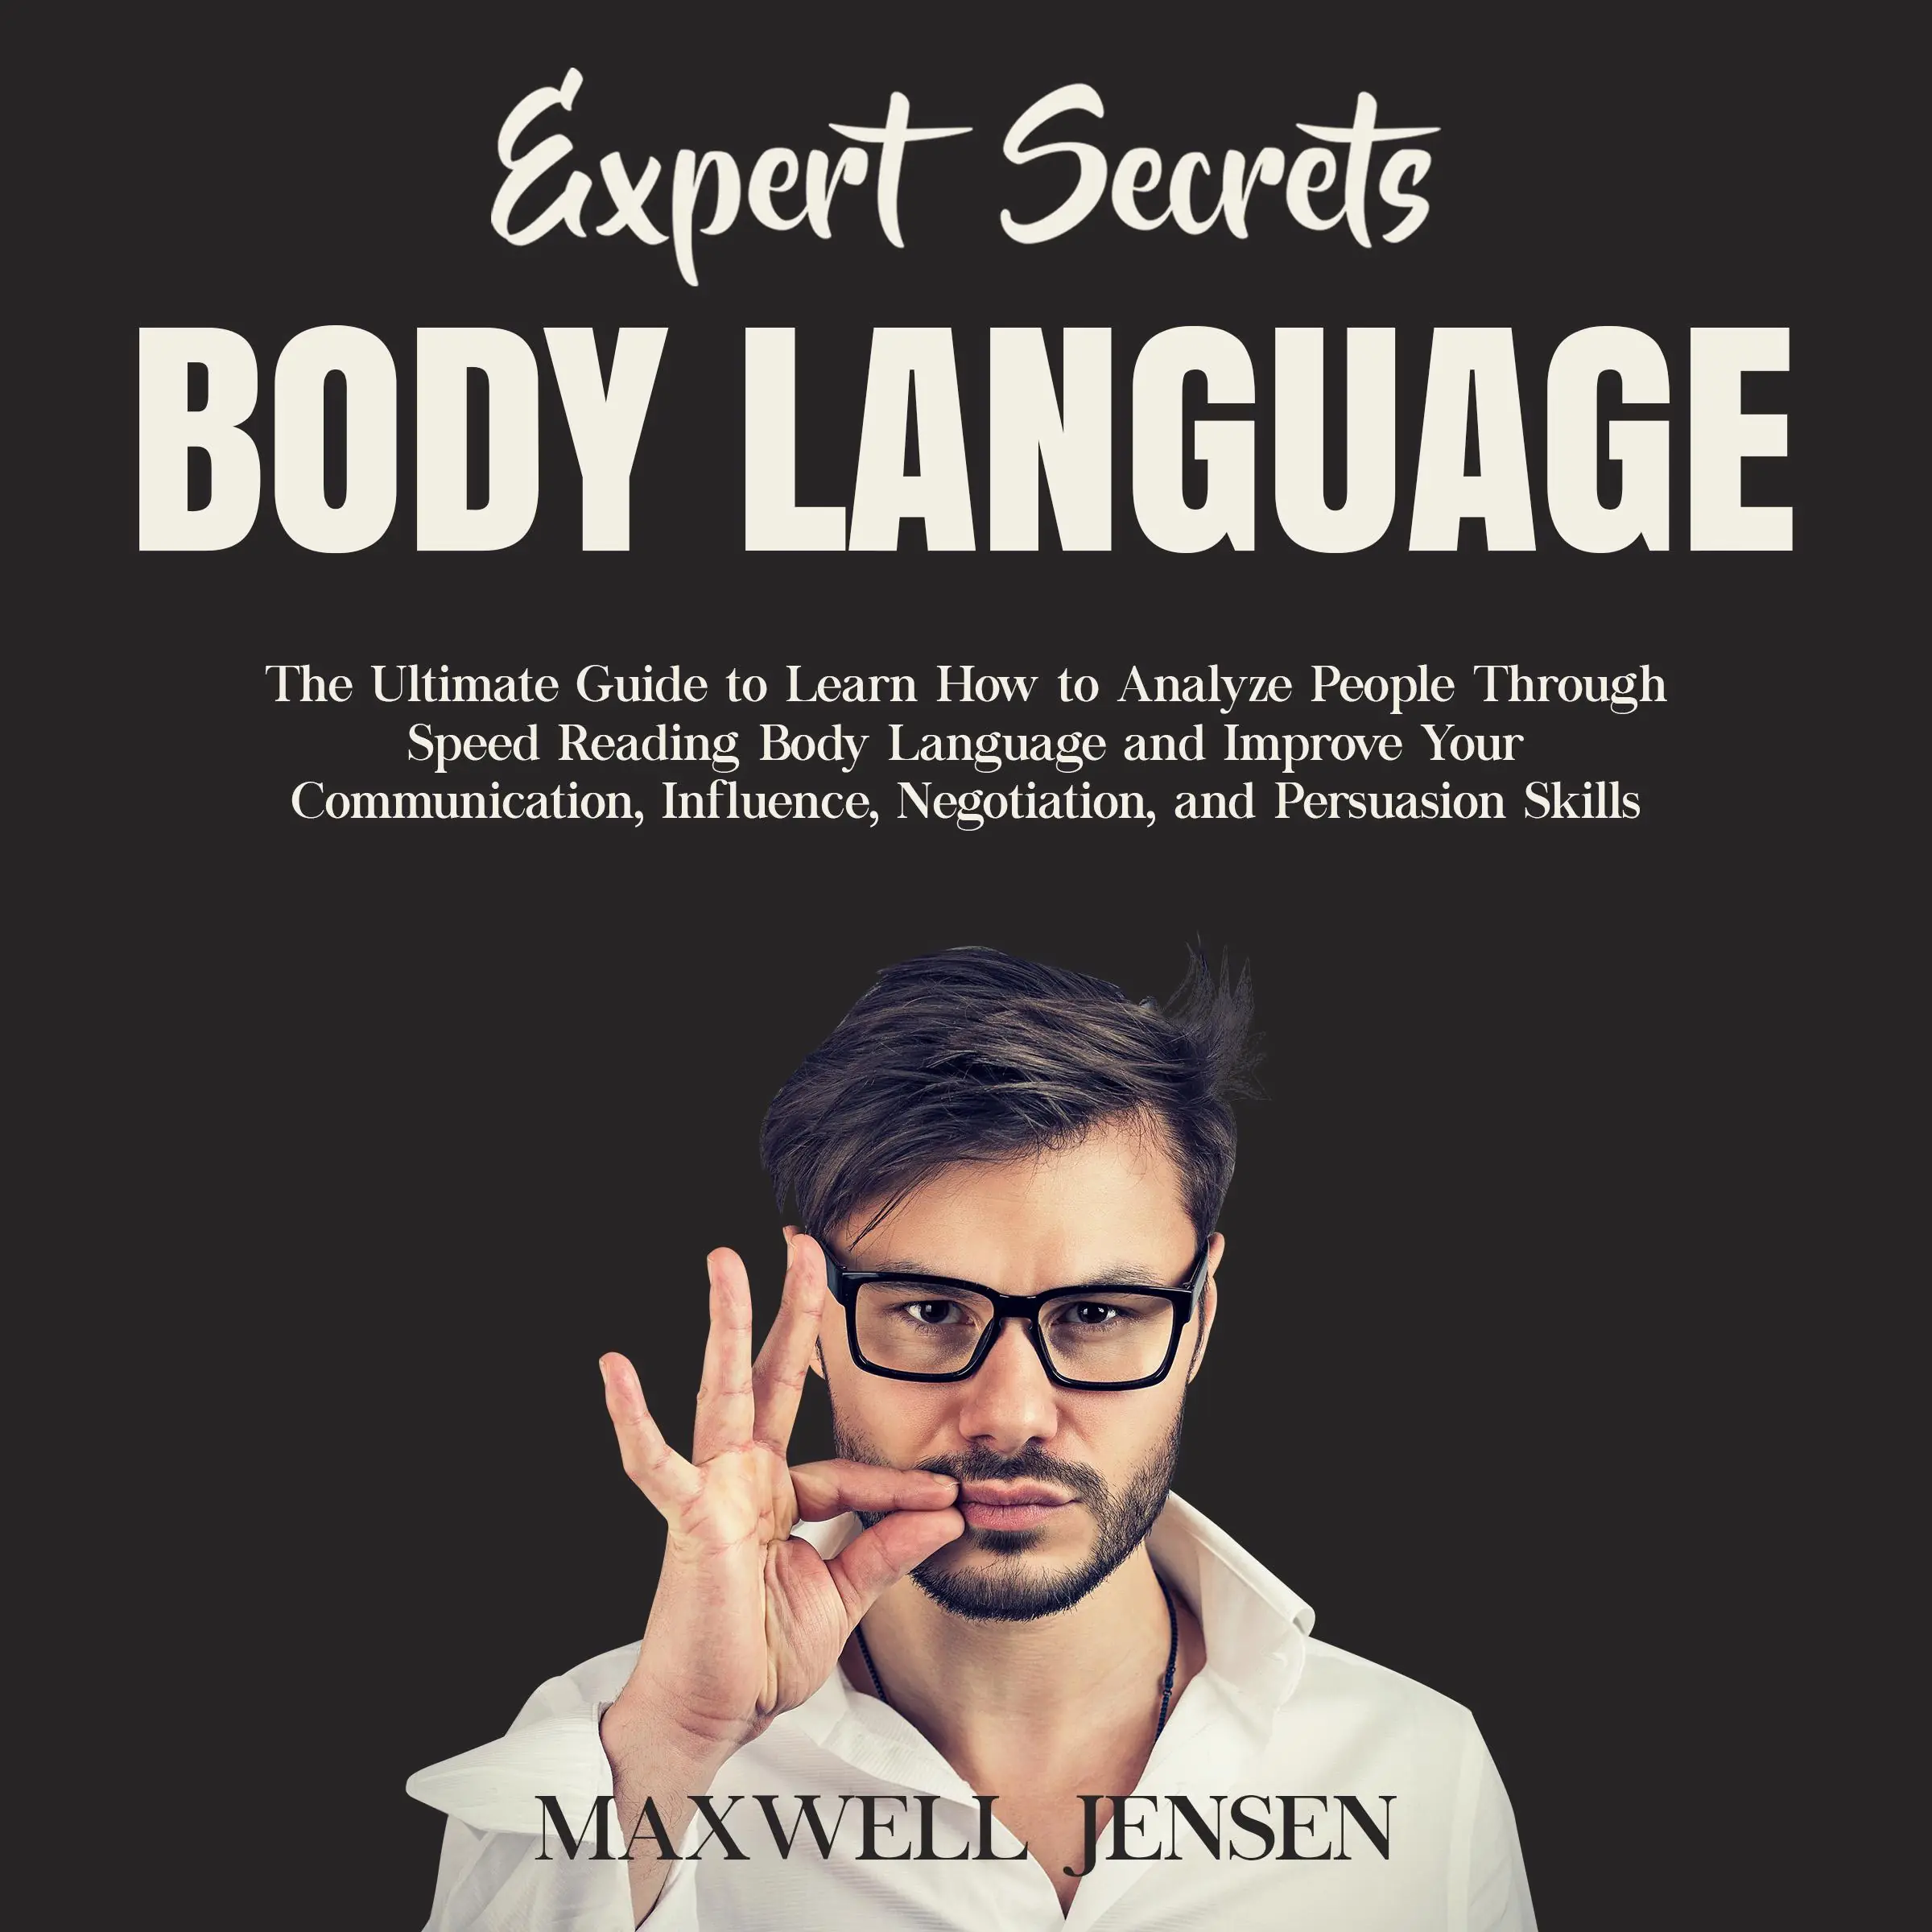 Expert Secrets – Body Language: The Ultimate Guide to Learn how to Analyze People Through Speed Reading Body Language and Improve Your Communication, Influence, Negotiation, and Persuasion Skills Audiobook by Maxwell Jensen